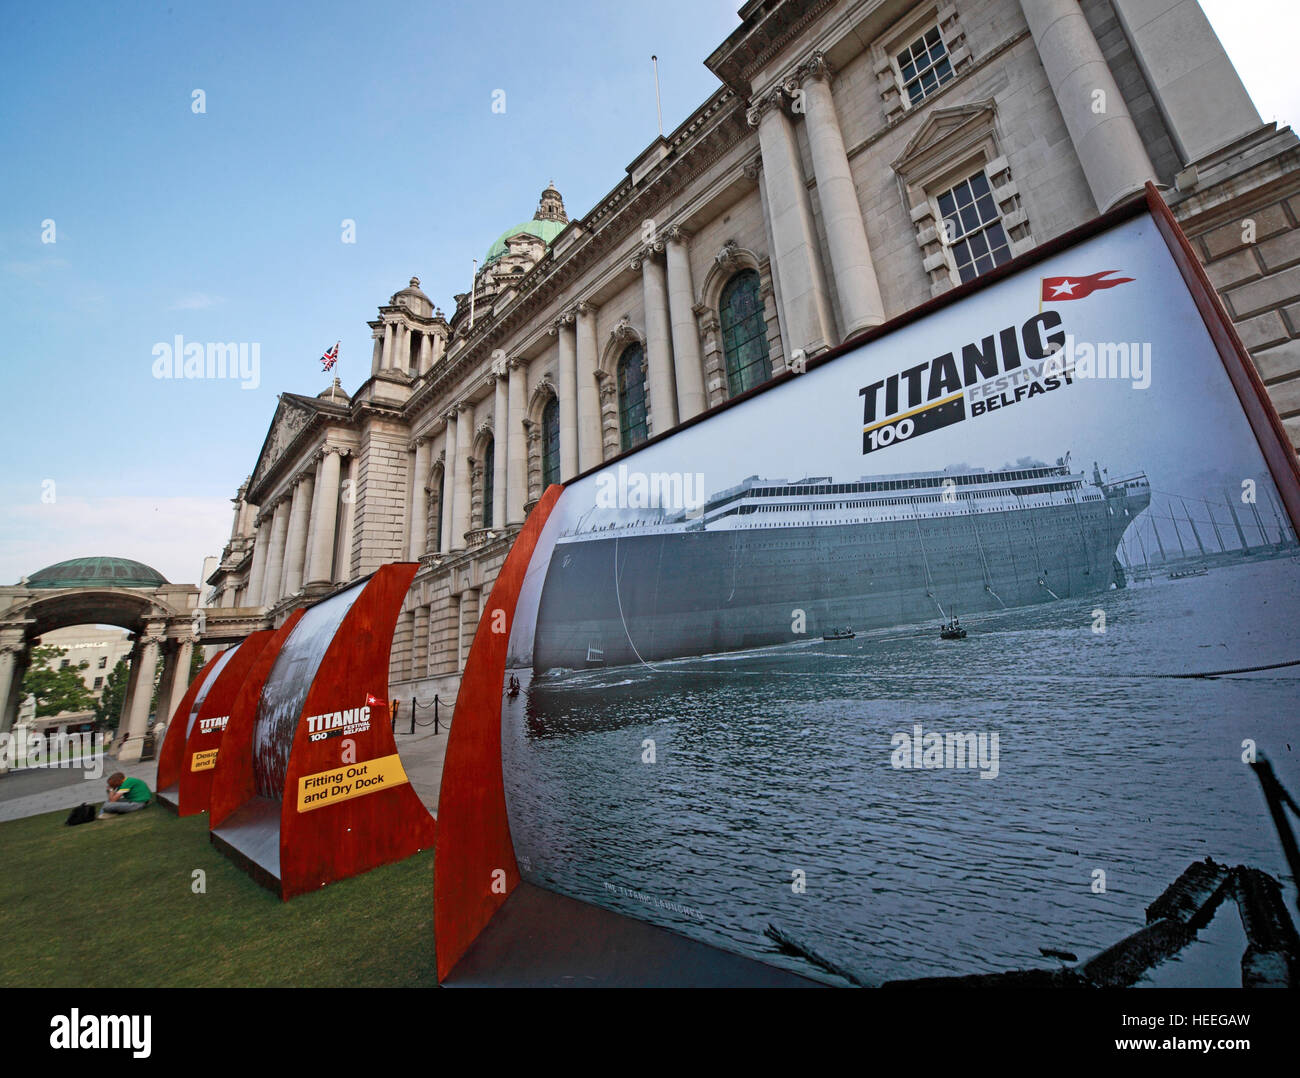 Belfast City Hall Baroque Revival Architecture, Donegall Square, Northern Ireland, UK - Titanic 100 years celebration 2011-2012 Stock Photo